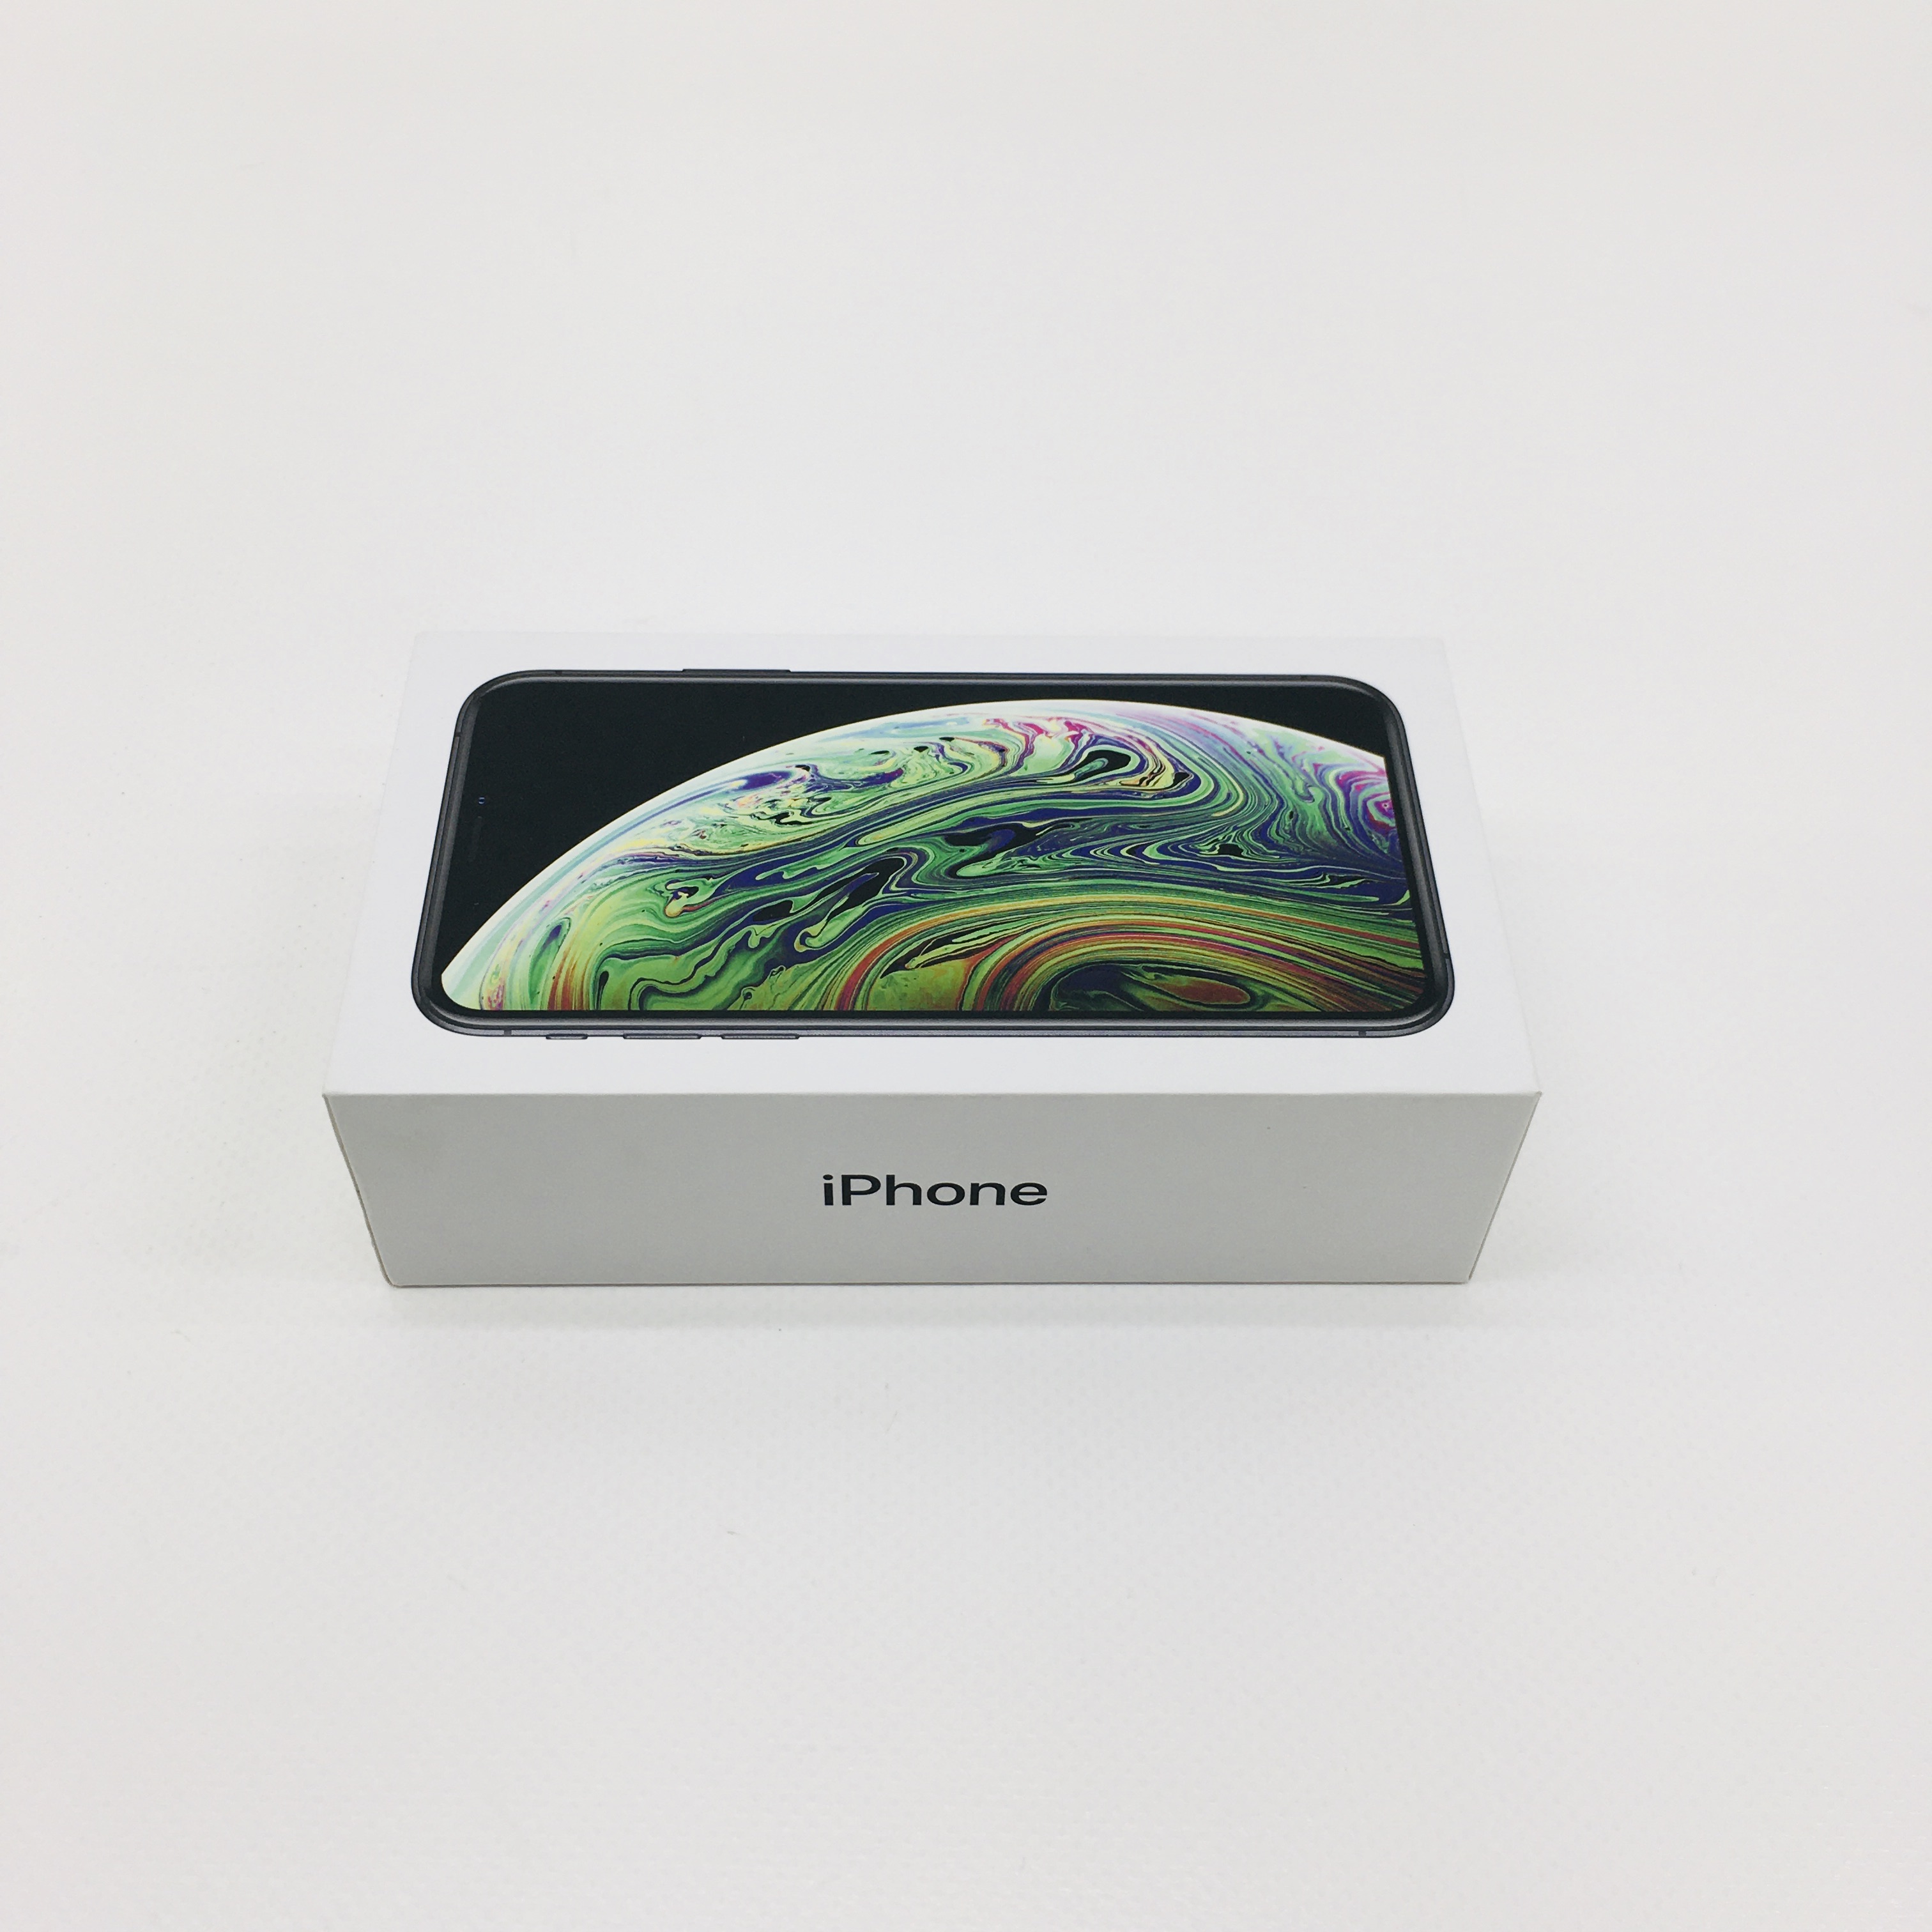 iPhone XS 256GB / Space Gray - mResell.com.au